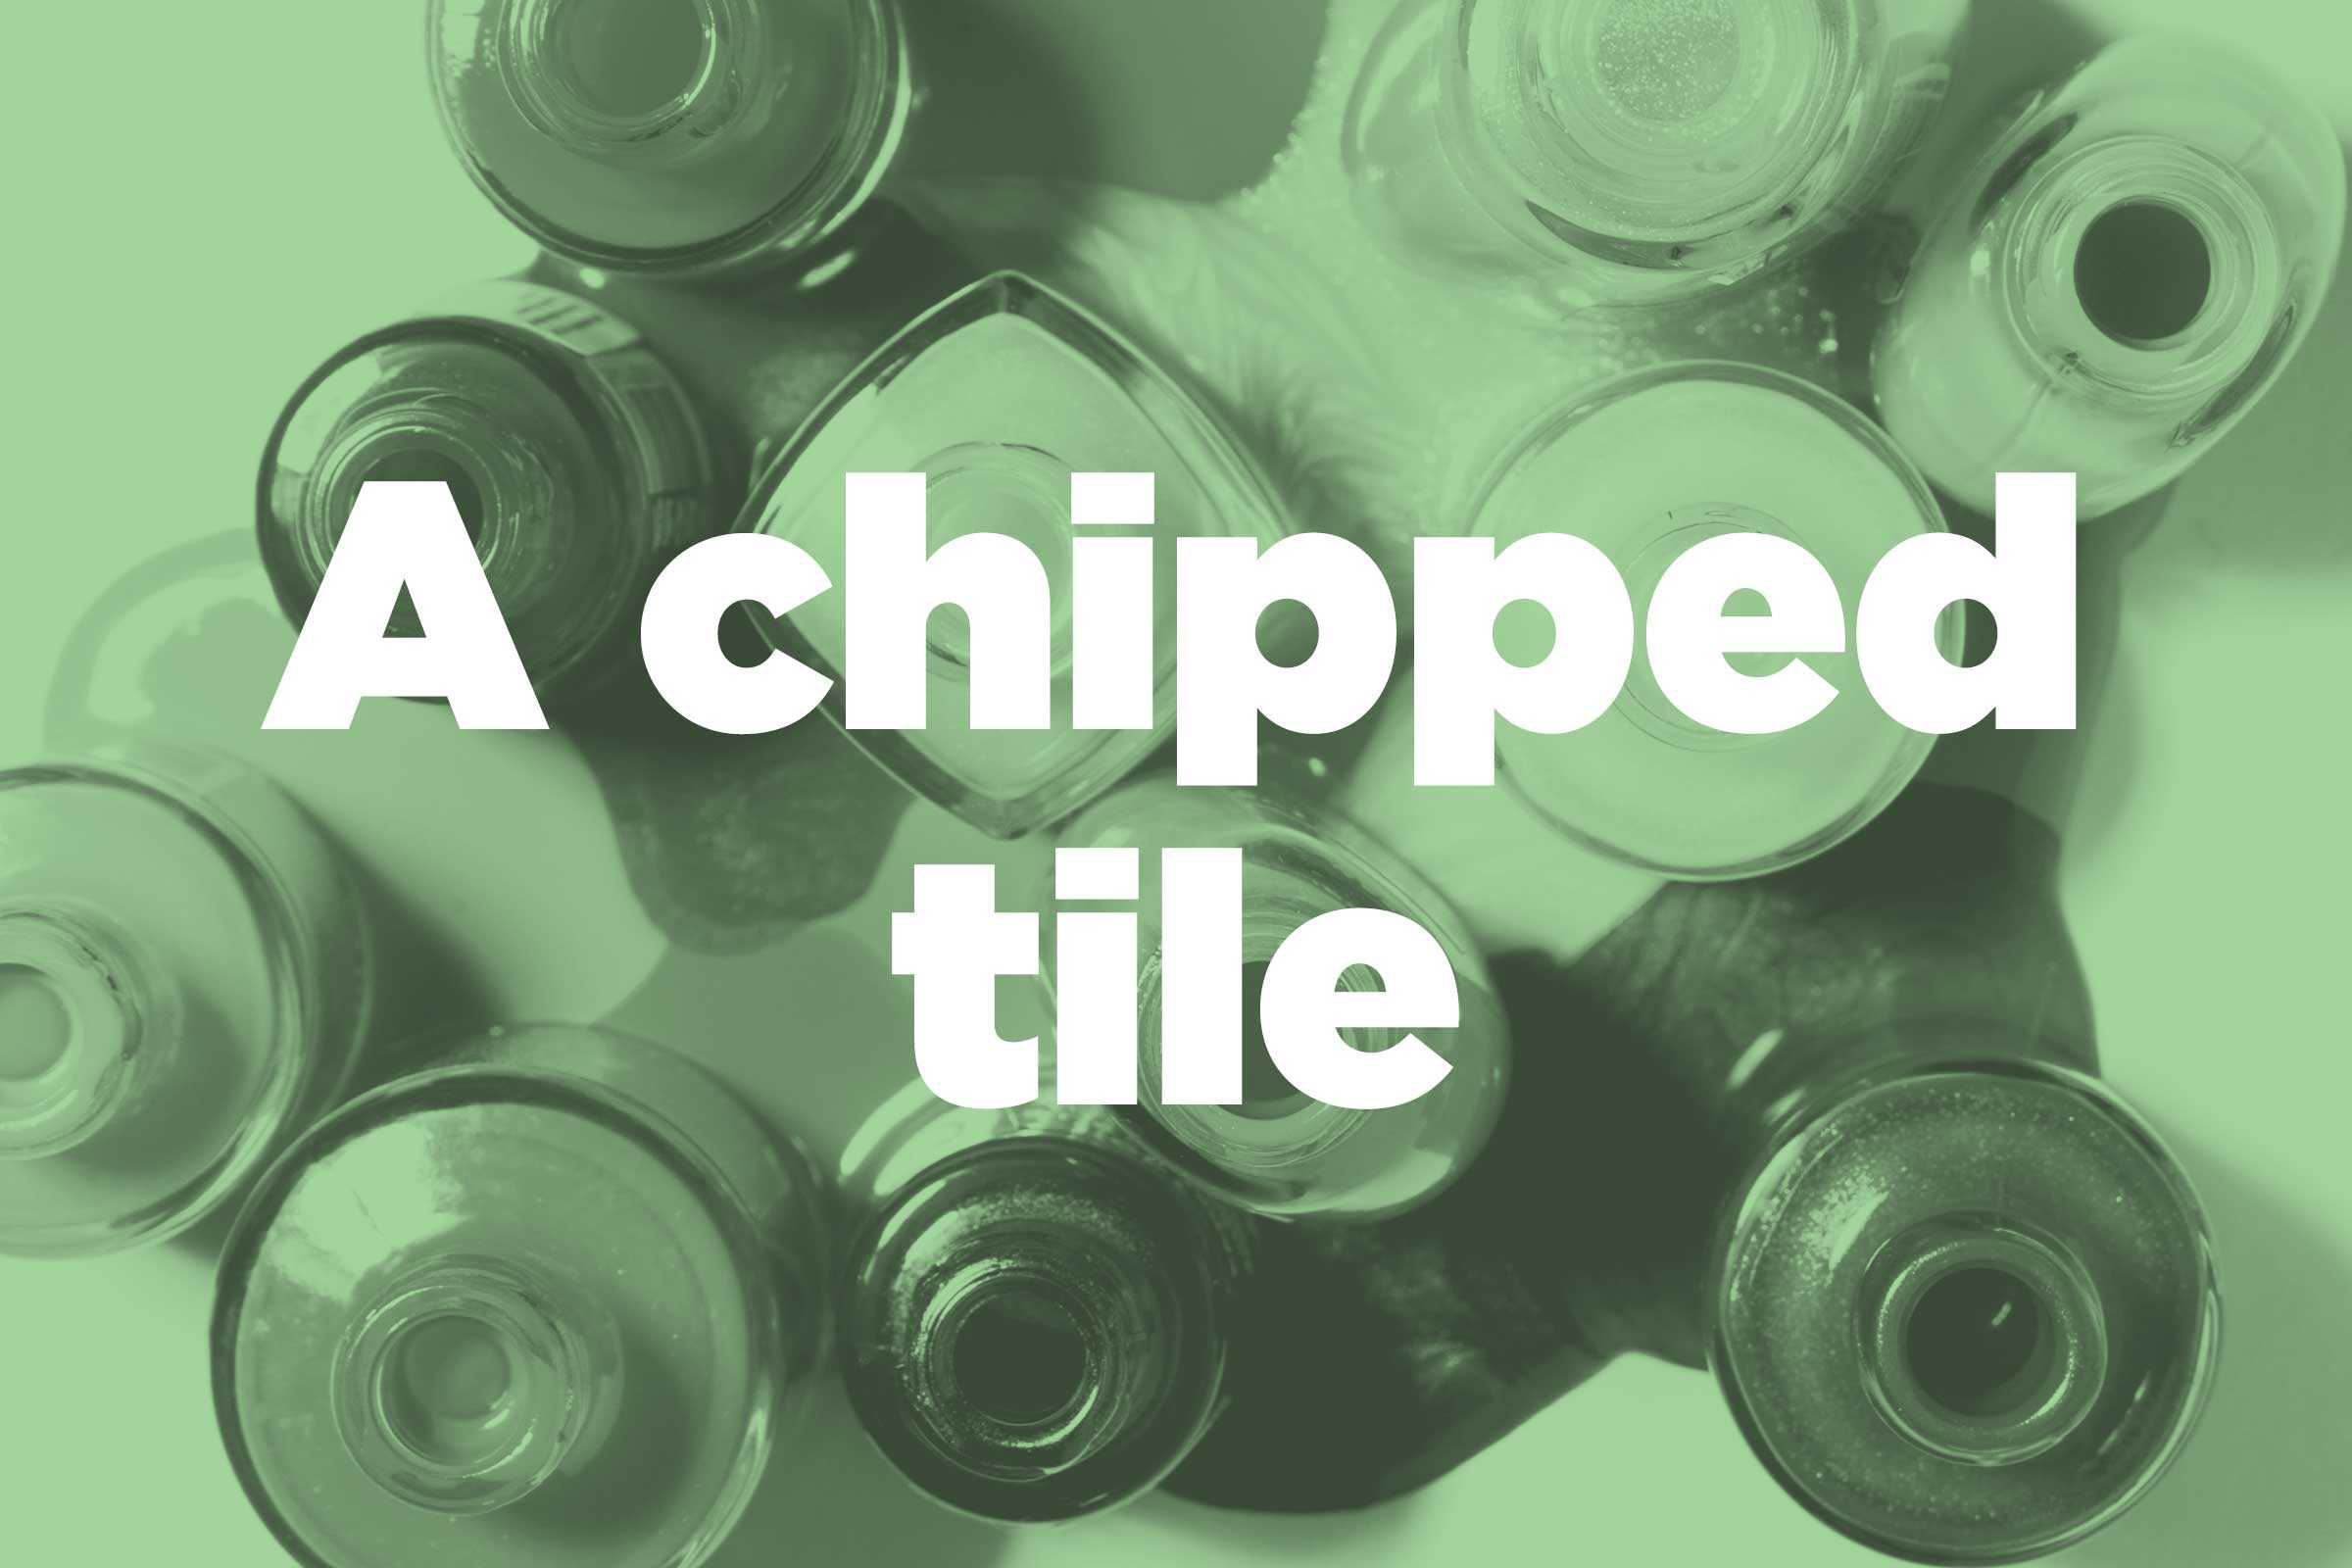 Hide a chipped tile